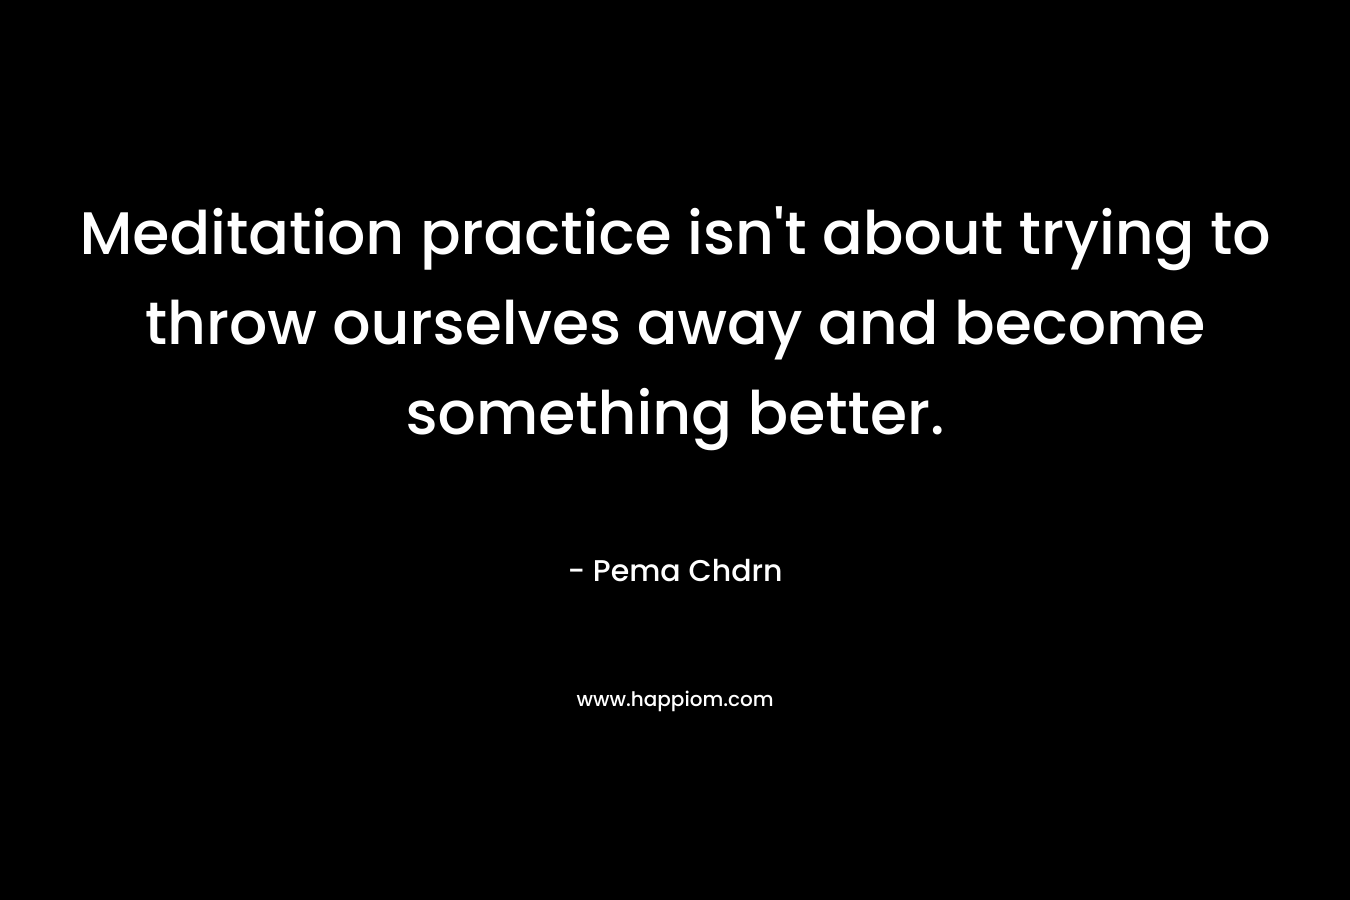 Meditation practice isn't about trying to throw ourselves away and become something better.